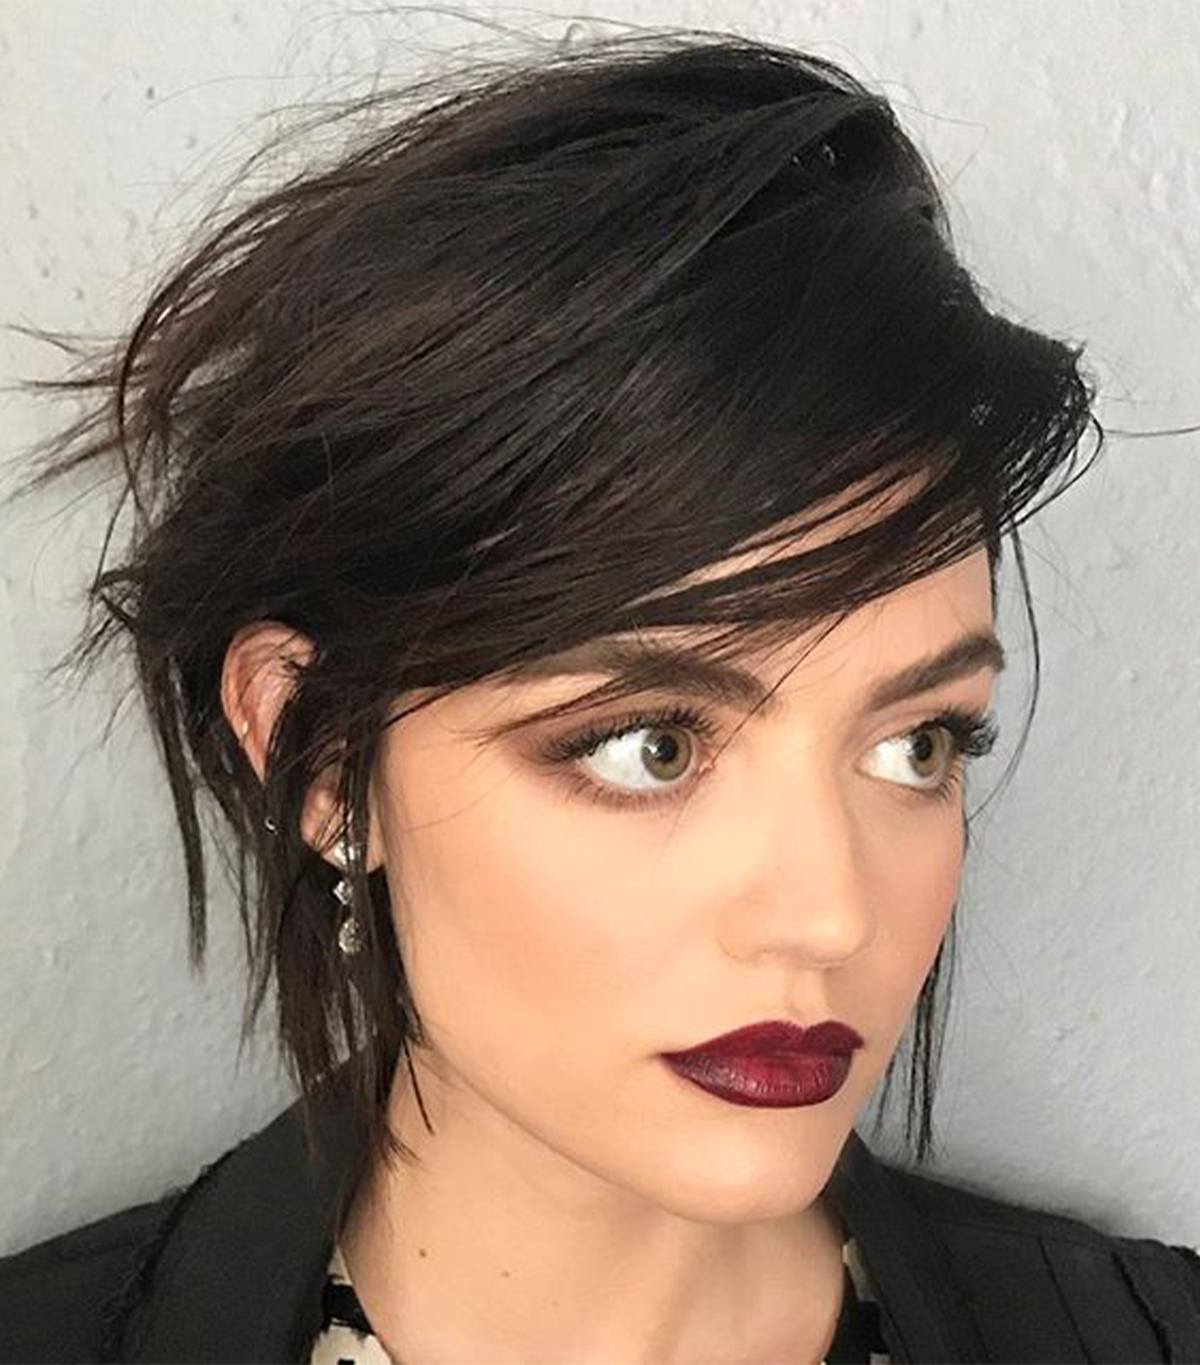 Hairstyles with wispy bangs: Lucy Hale